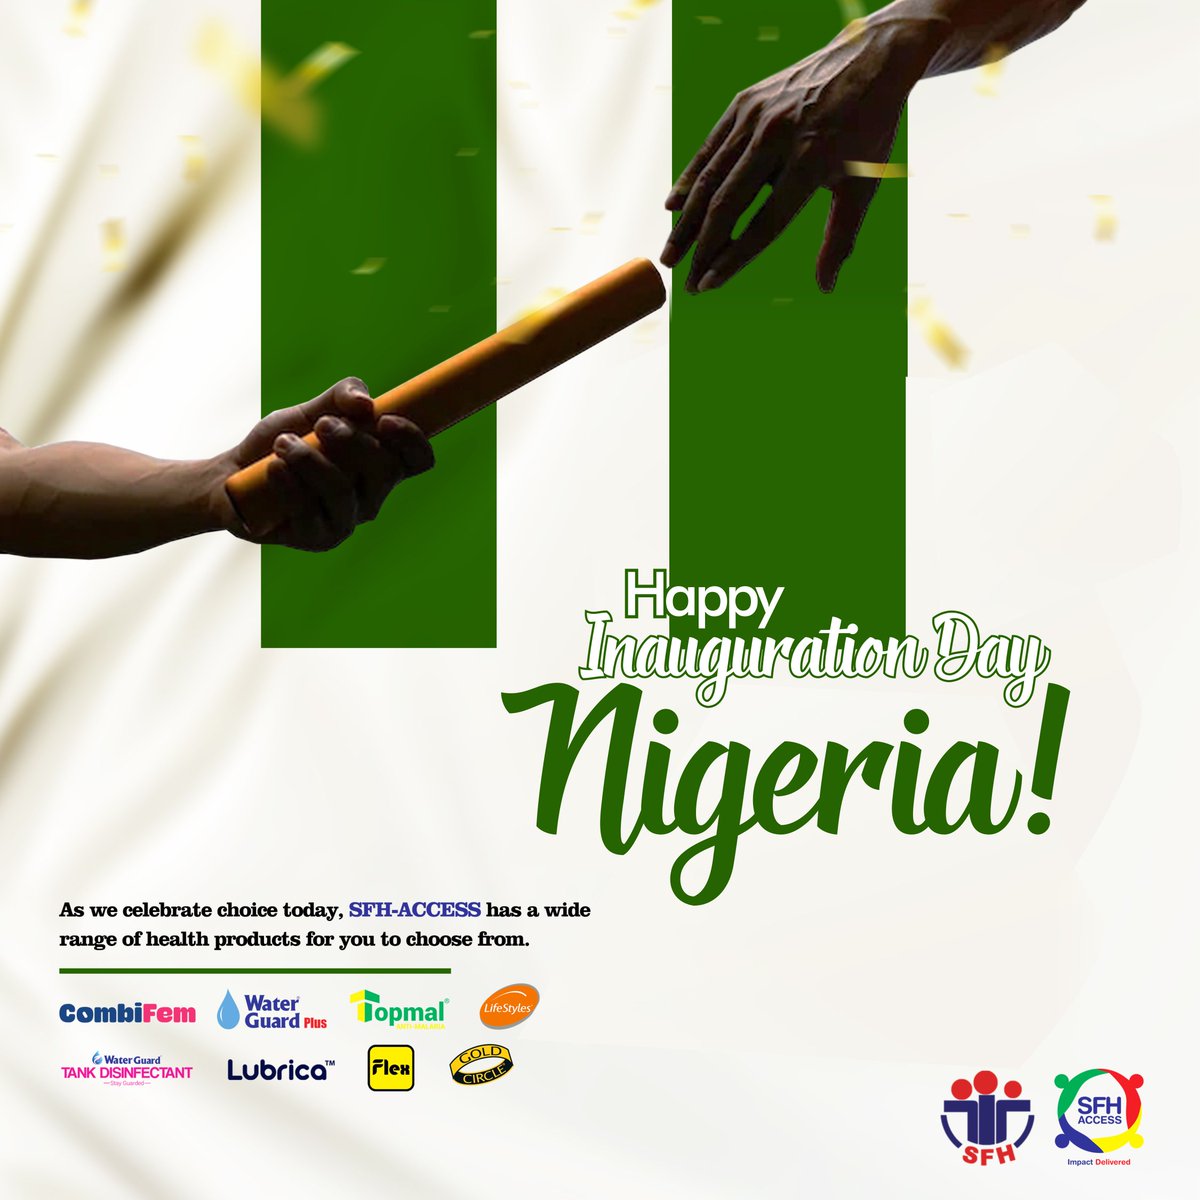 When we stand up for our Health,
We stand up for our Right.

HAPPY INAUGURATION DAY NIGERIA!🇳🇬

#inaugurationday #May29th #proudlyNigerian #unityindiversity #buildinganewNigeria #HealthyNigeria #happyinaugurationday